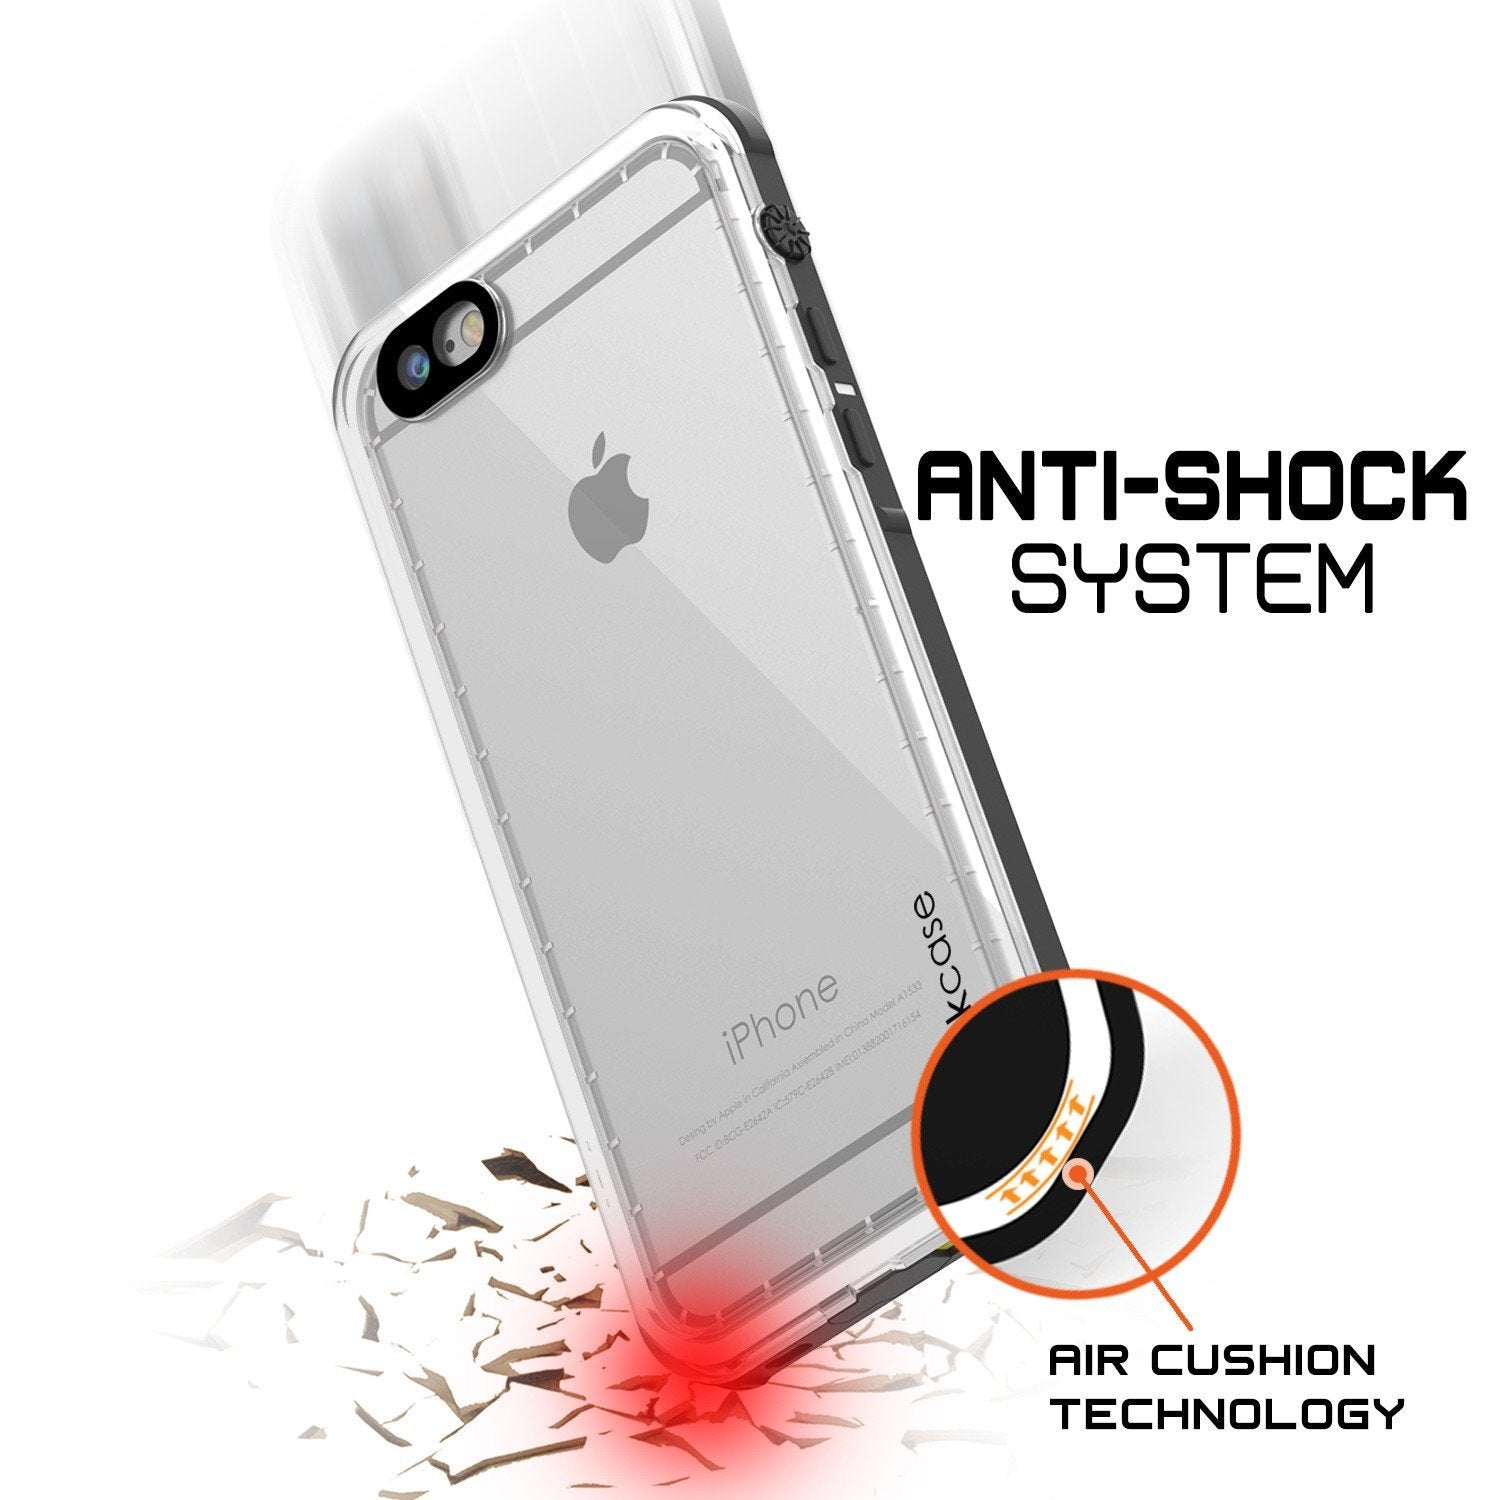 Apple iPhone 8 Waterproof Case, PUNKcase CRYSTAL White W/ Attached Screen Protector  | Warranty - PunkCase NZ